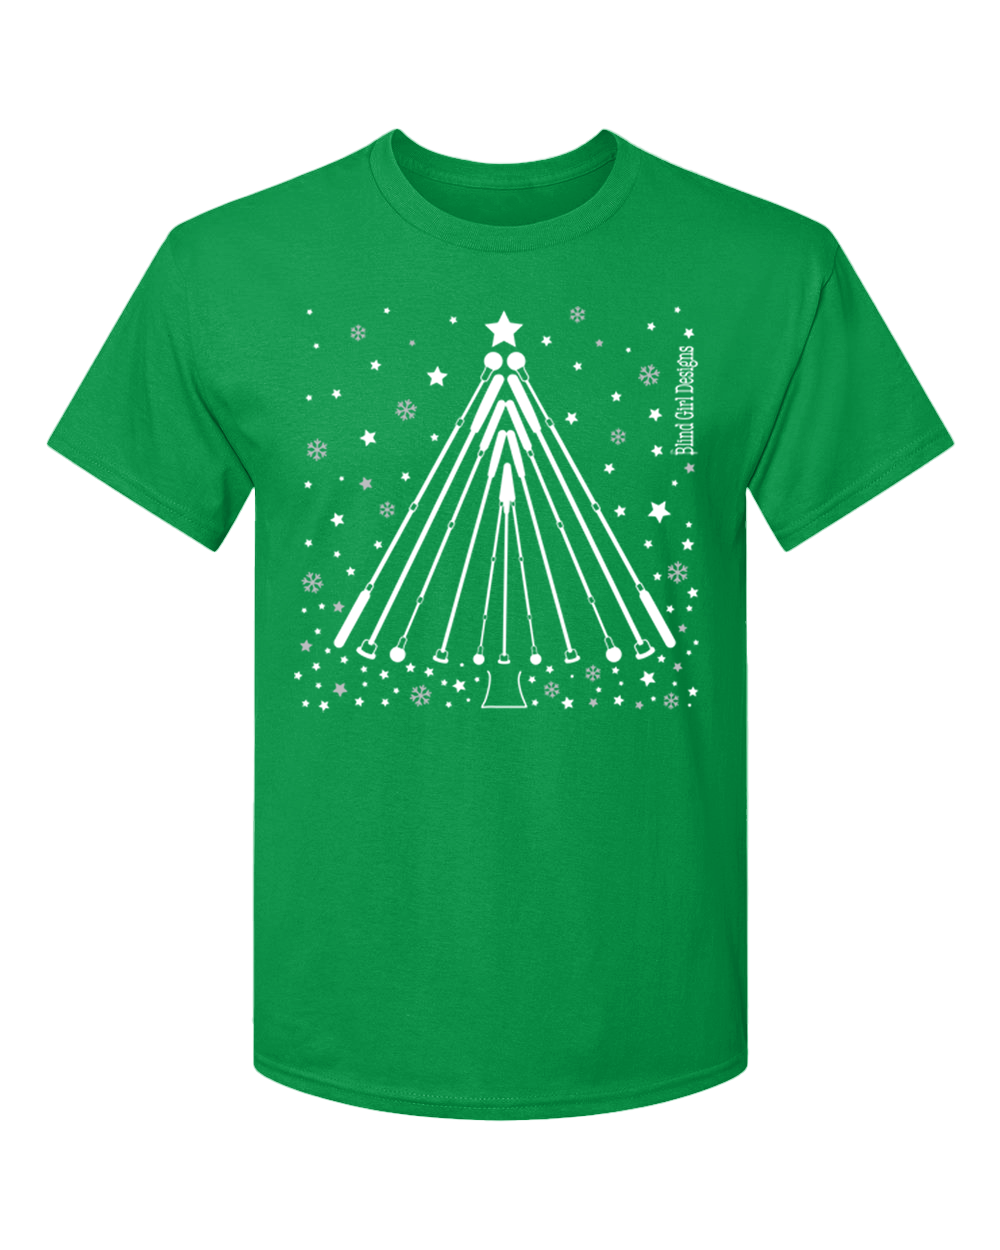 New 3D!  Tactile Winter Tree White Cane T-Shirt - Bright Green